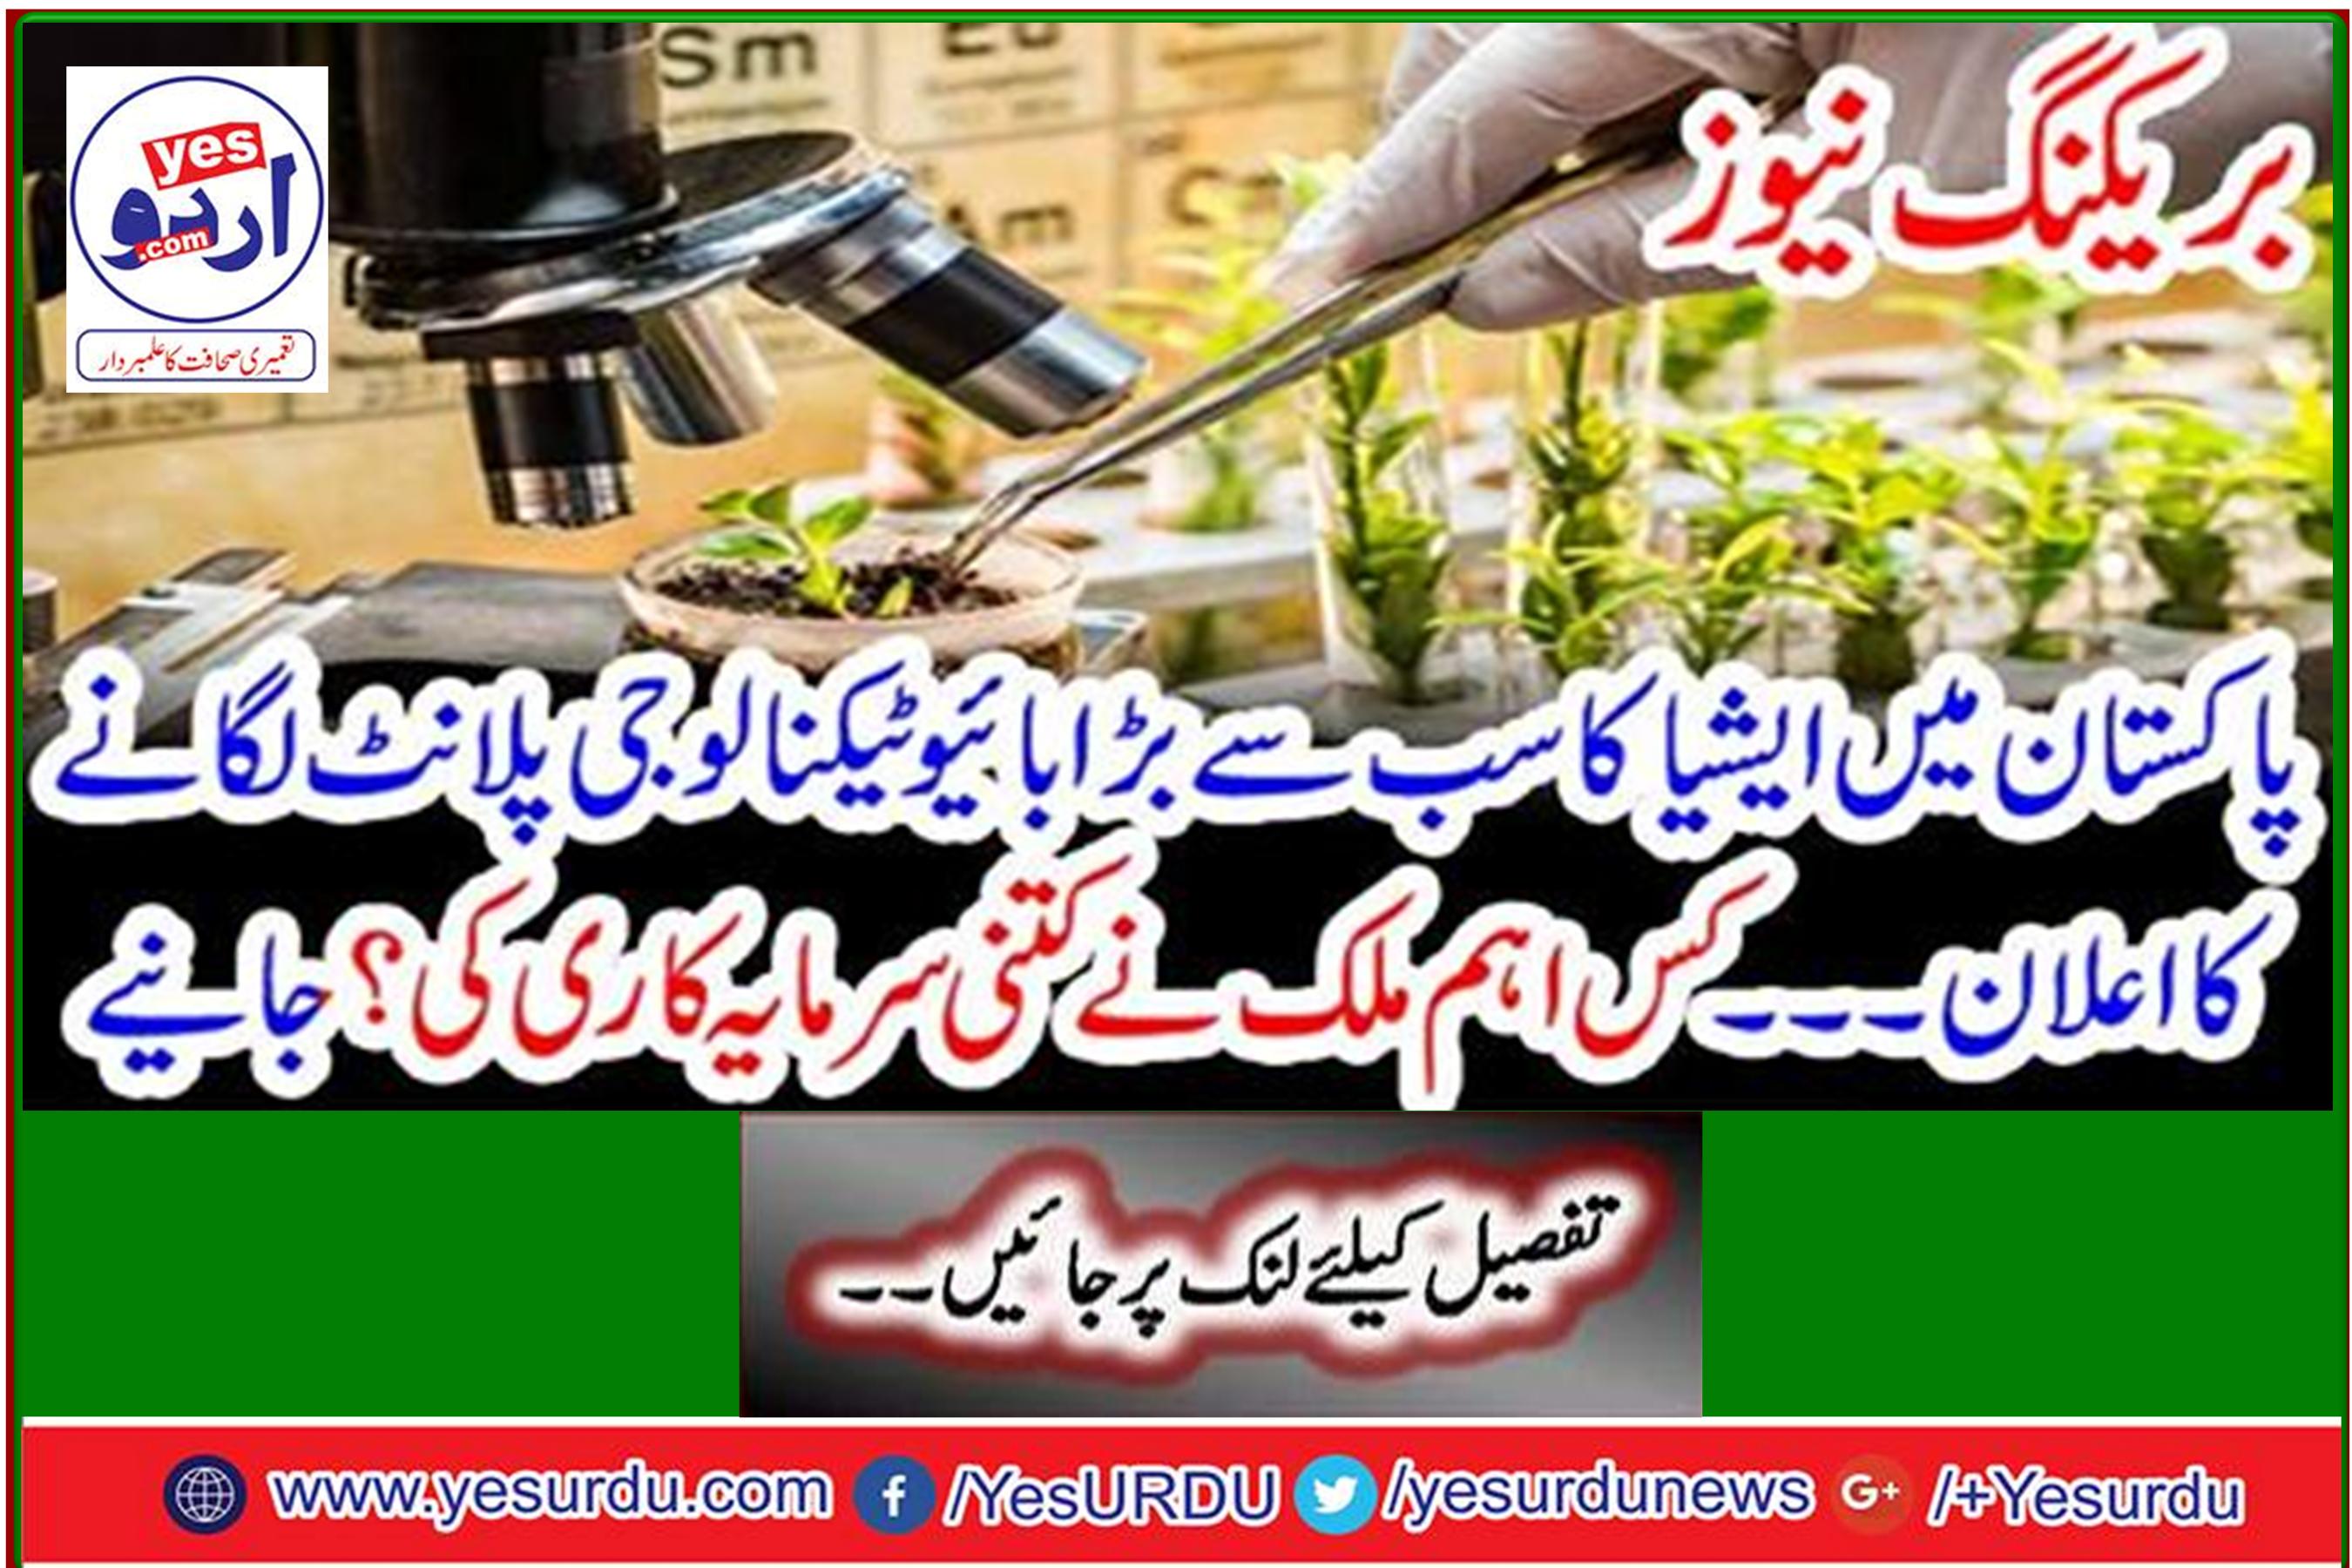 Breaking News: Pakistan announces Asia's largest biotechnology plant - How much investment did a major country make? Learn